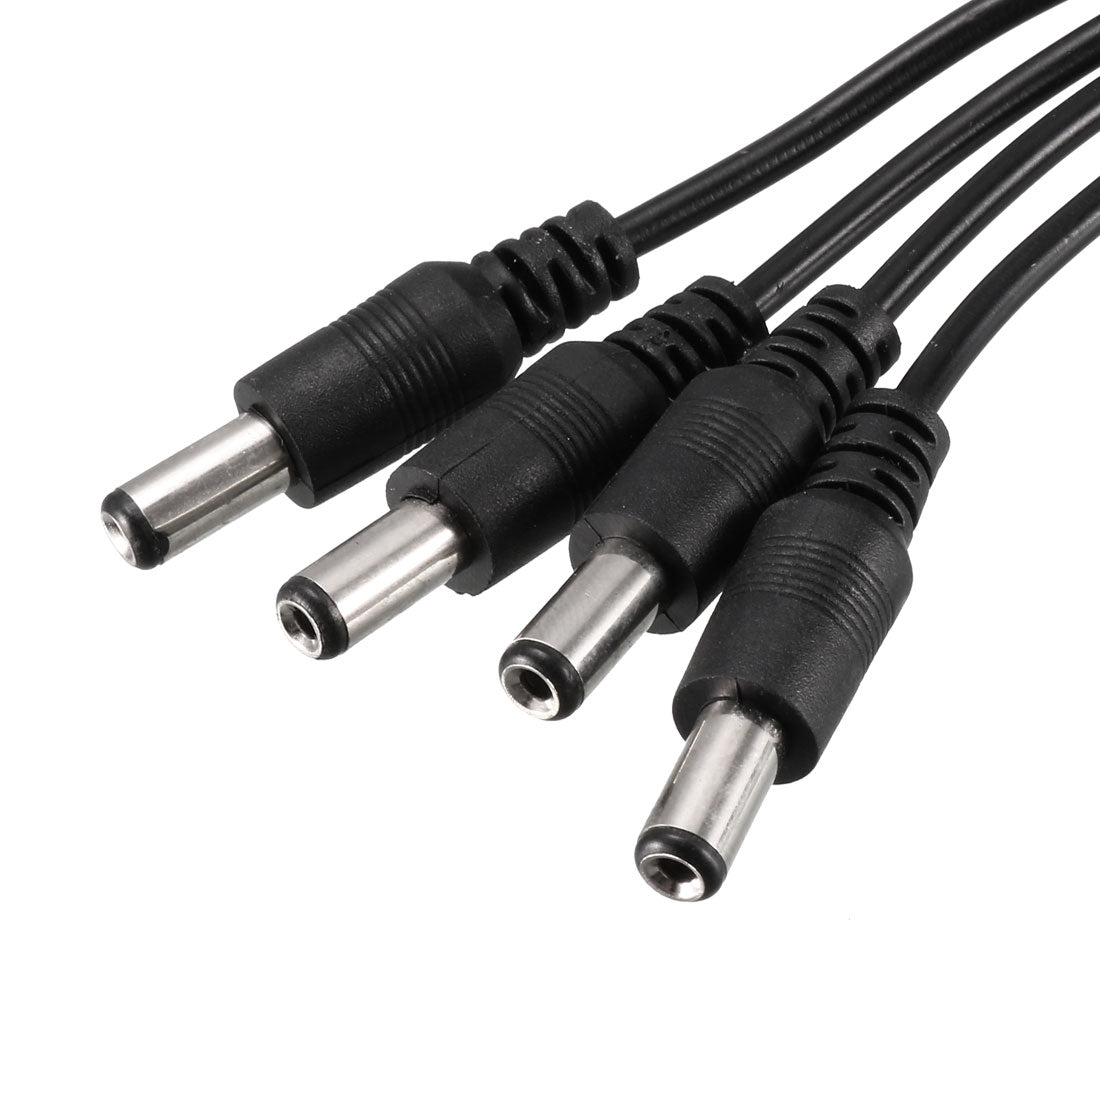 uxcell Uxcell 2pcs Splitter Cable 1 Female to 4 Male Connectors 40cm 12V 5.5x2.1mm Black